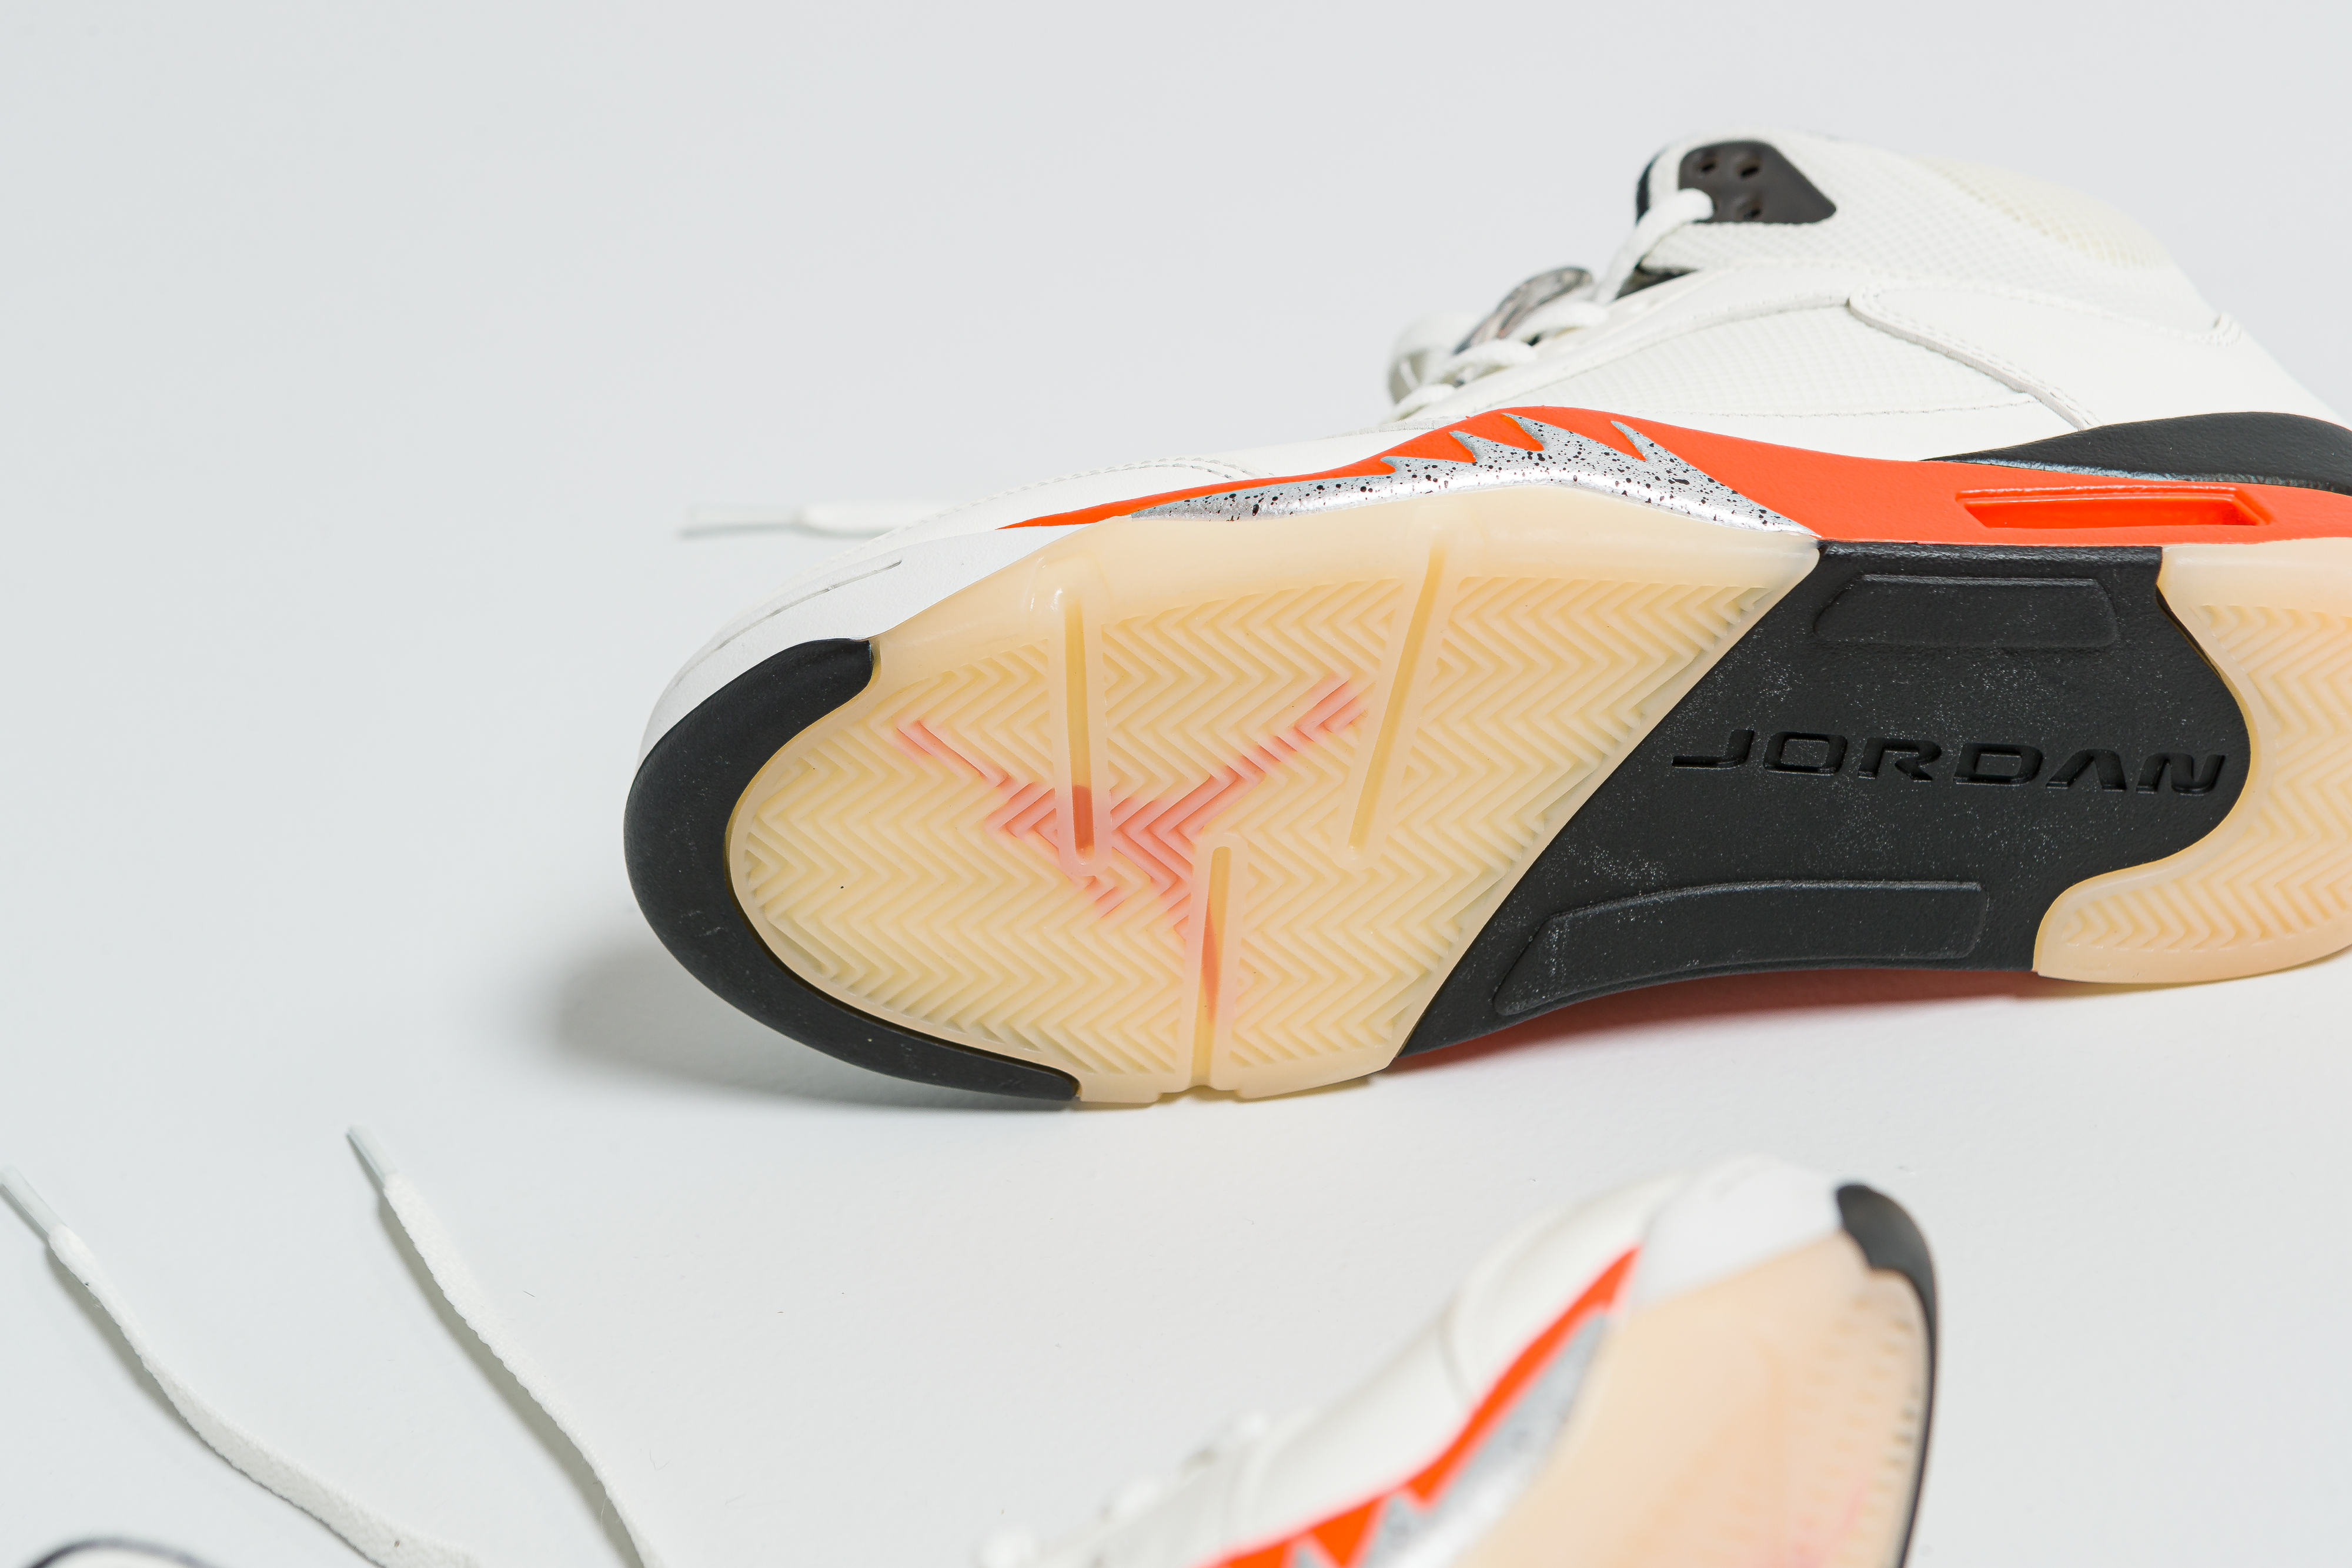 Up There Launches - Nike Air Jordan 5 Retro ‘Shattered Backboard'